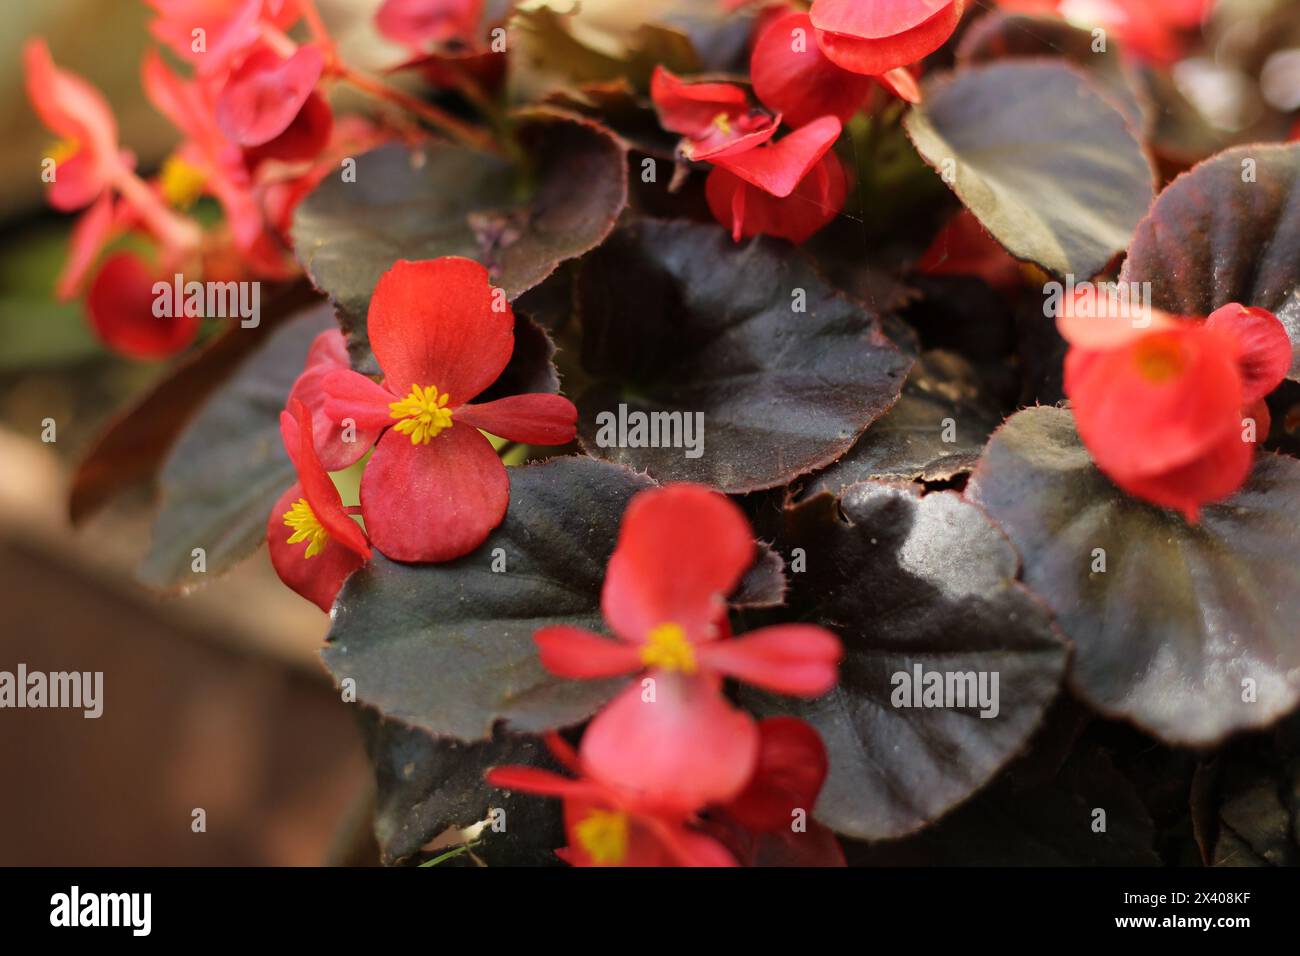 Red begonia with bronze leaf flowering in garden. Stock Photo